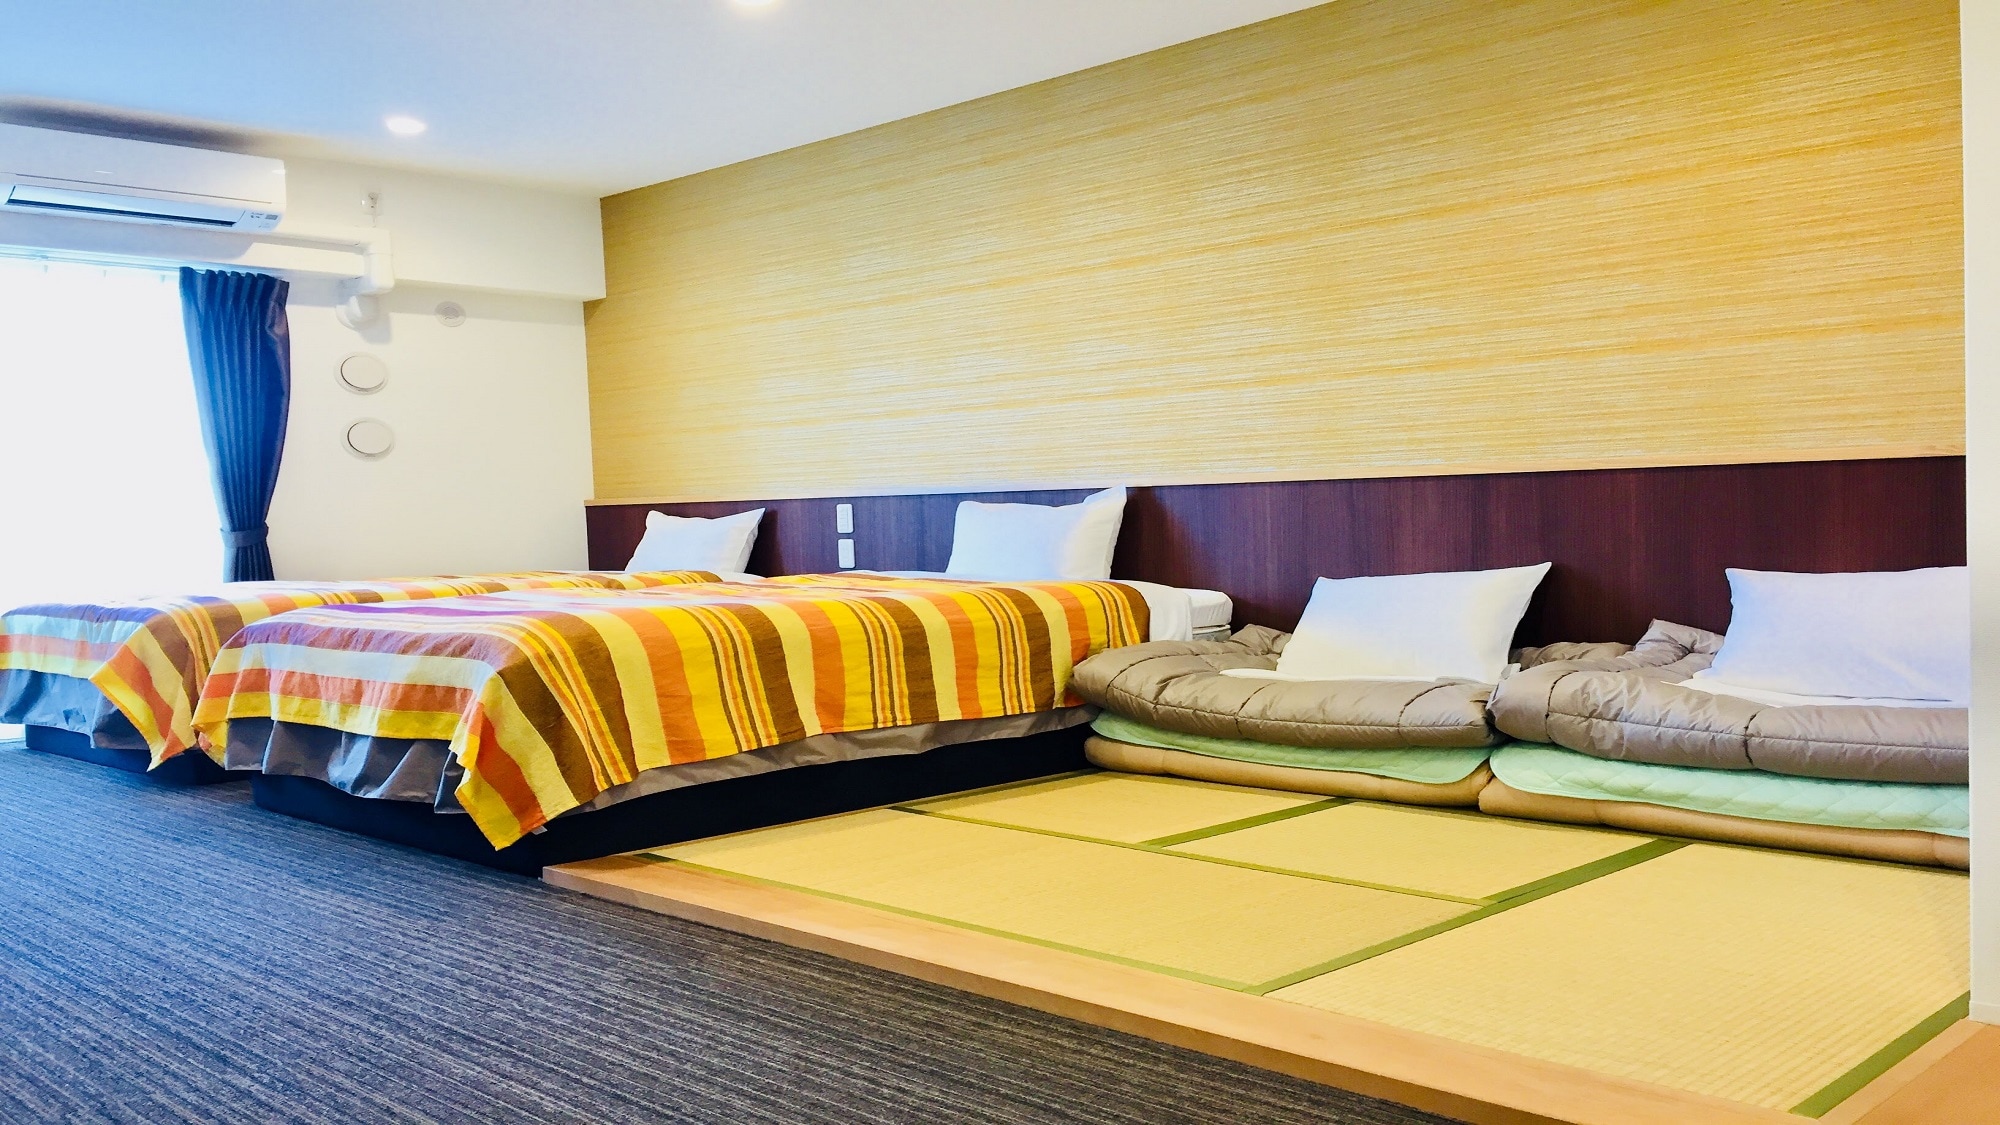 ■ Japanese and Western rooms ■ For 3 people or more, prepare futons in the tatami space. (Maximum 2 sheets)